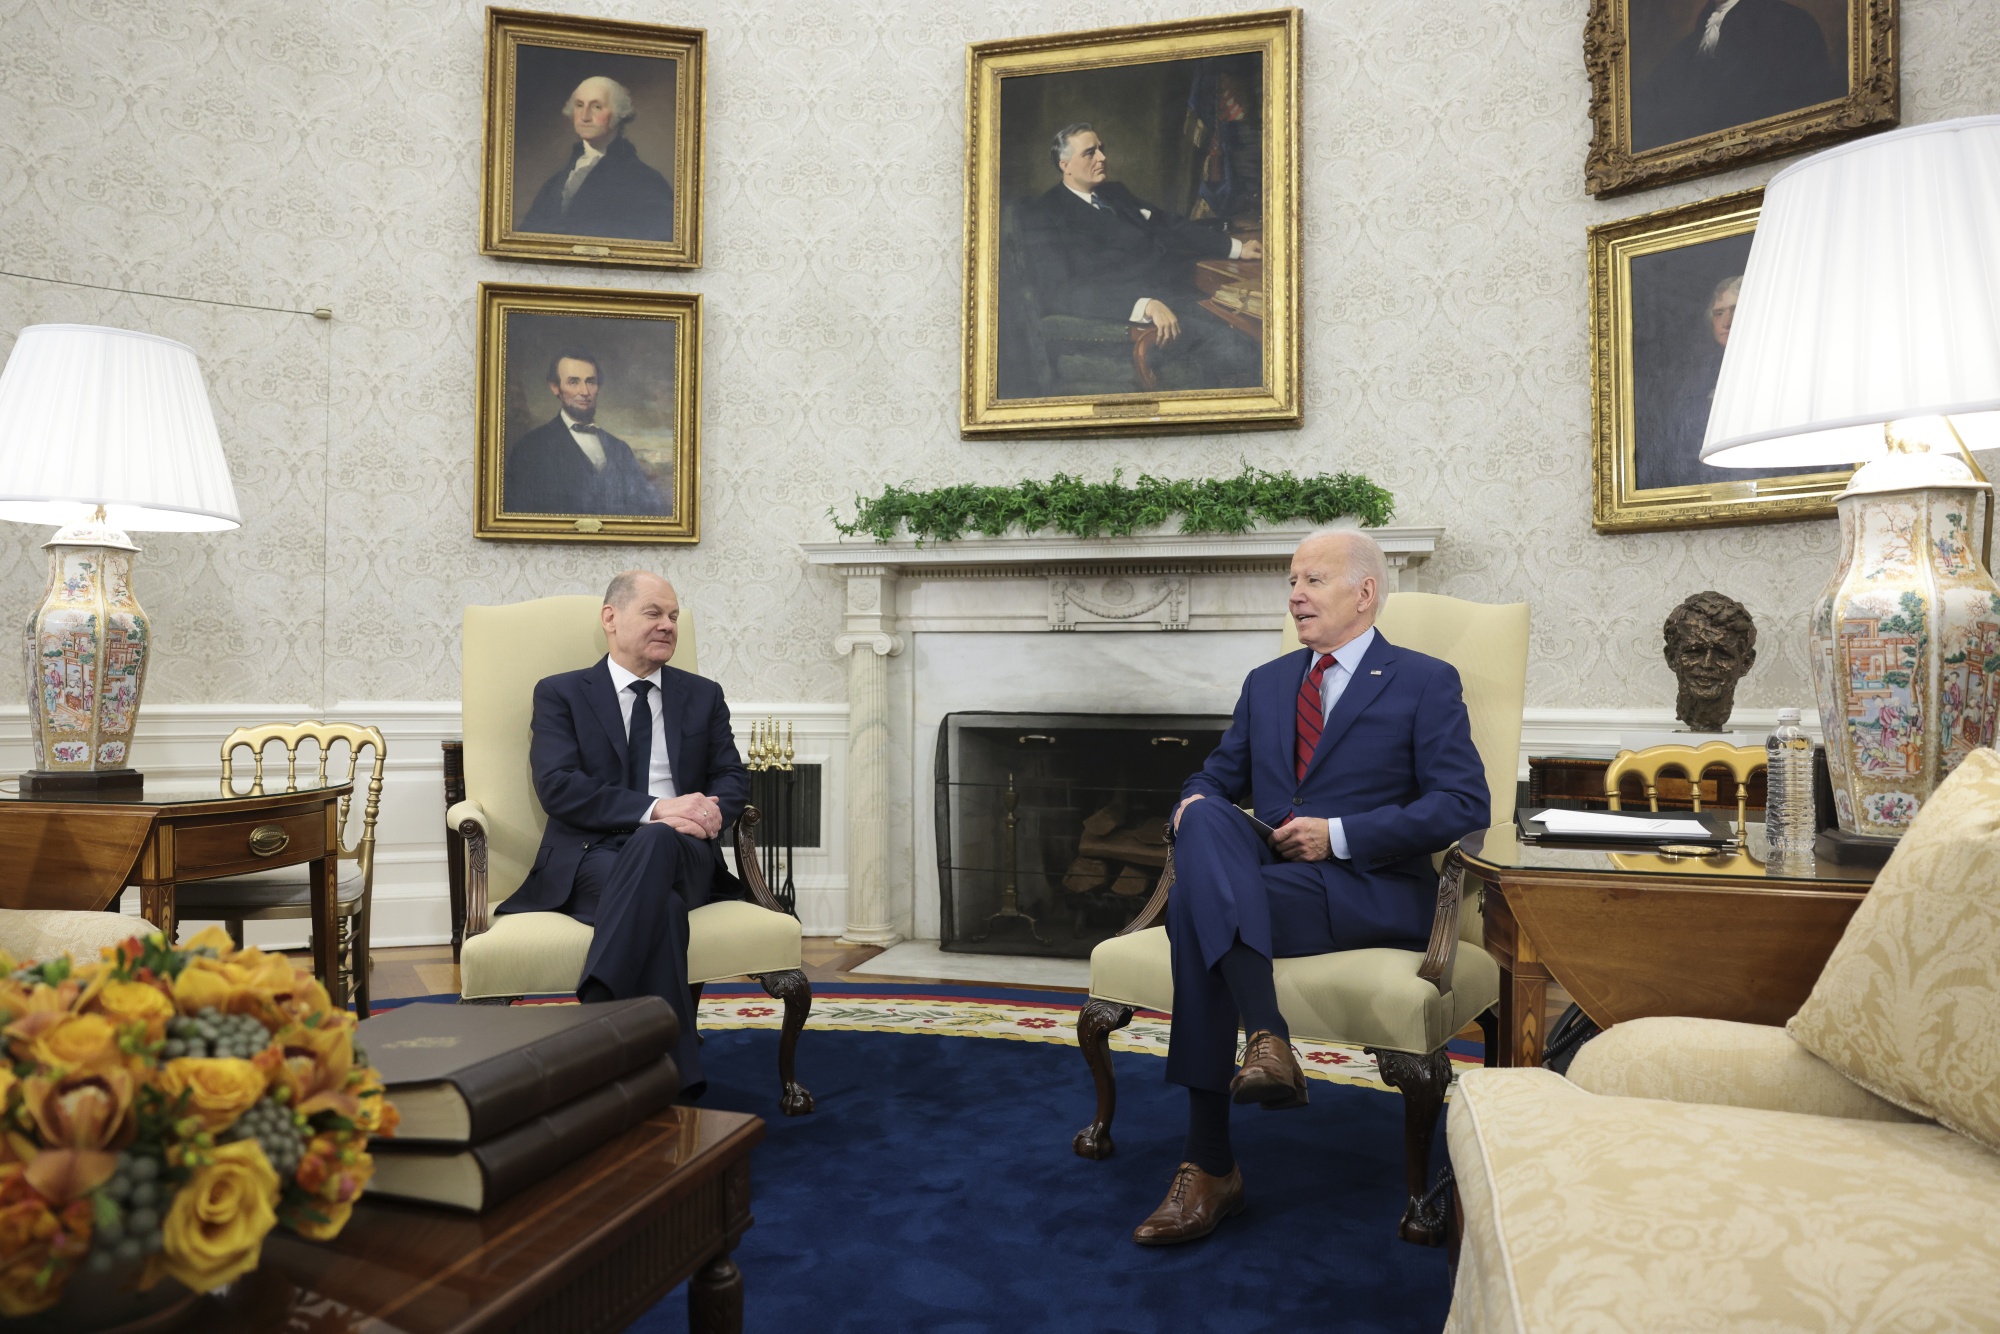 President Joe Biden speaks with Chancellor&nbsp;Olaf Scholz, left,&nbsp;during a meeting in the Oval Office, on March 3.